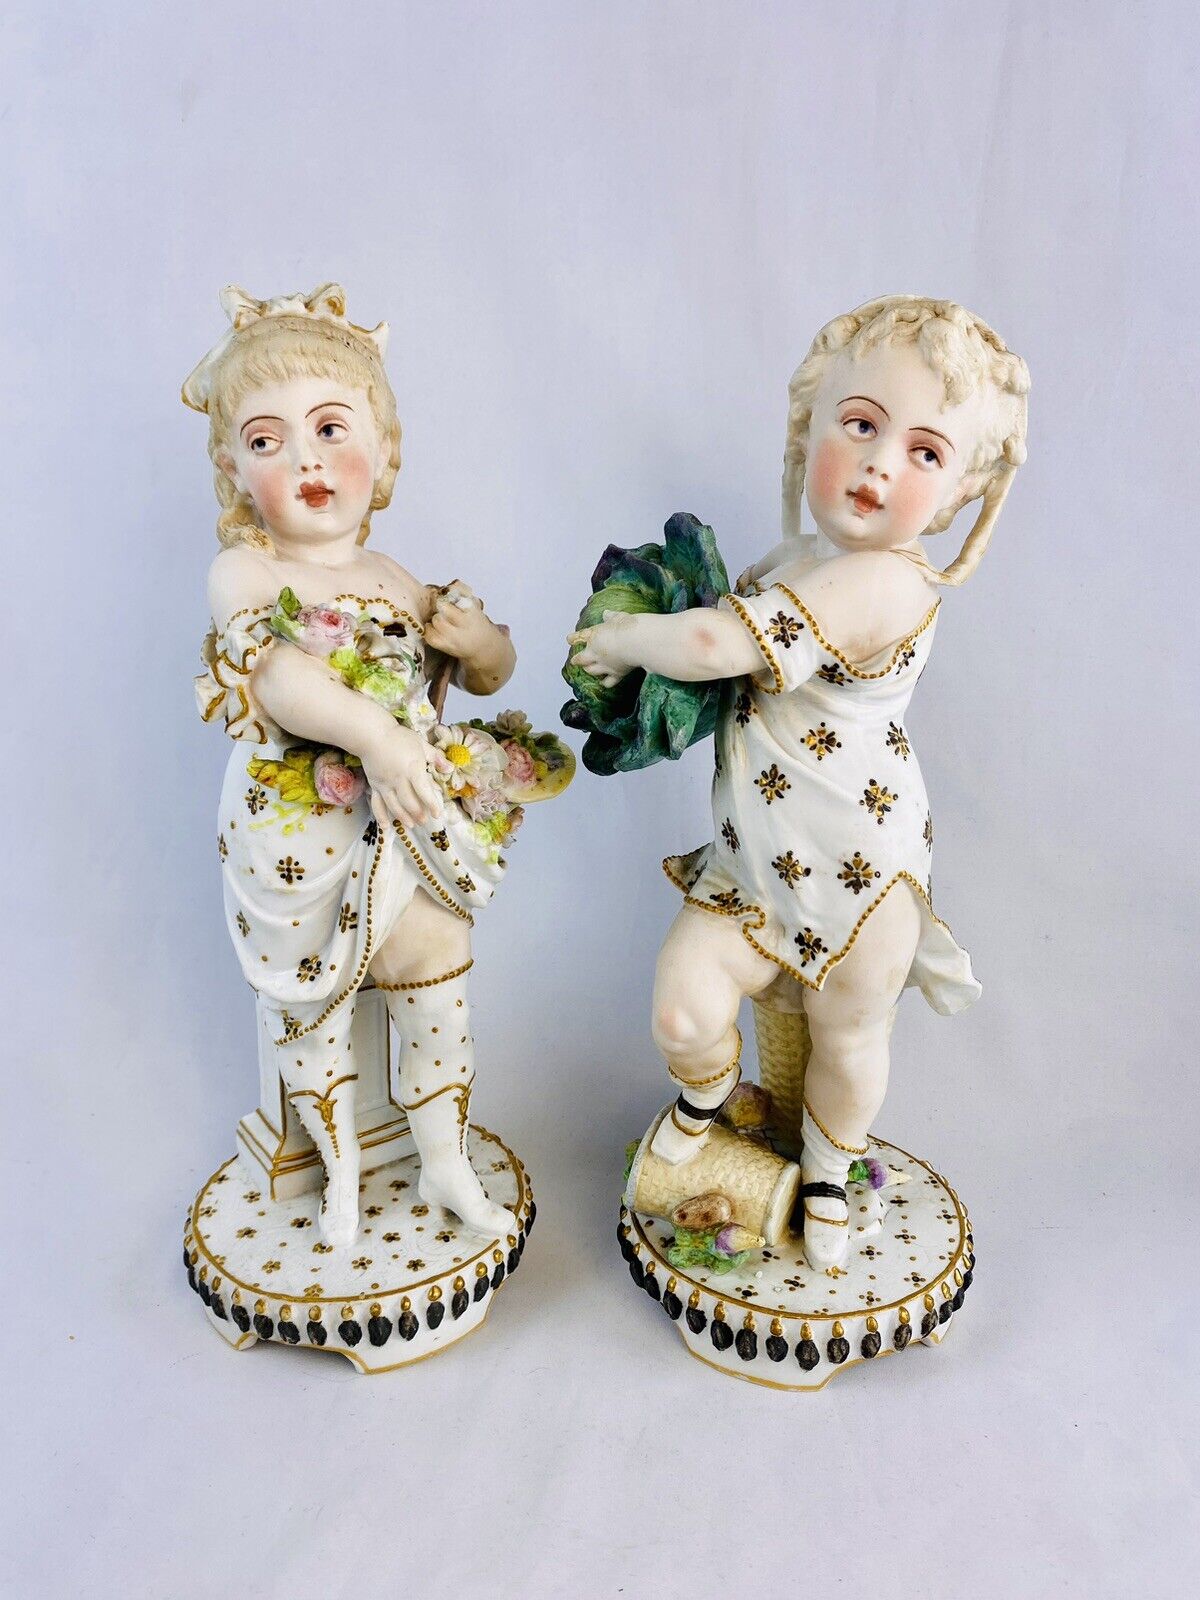 Antique German All Bisque Figurines Boy & Girl Carrying Flowers - 12” Tall